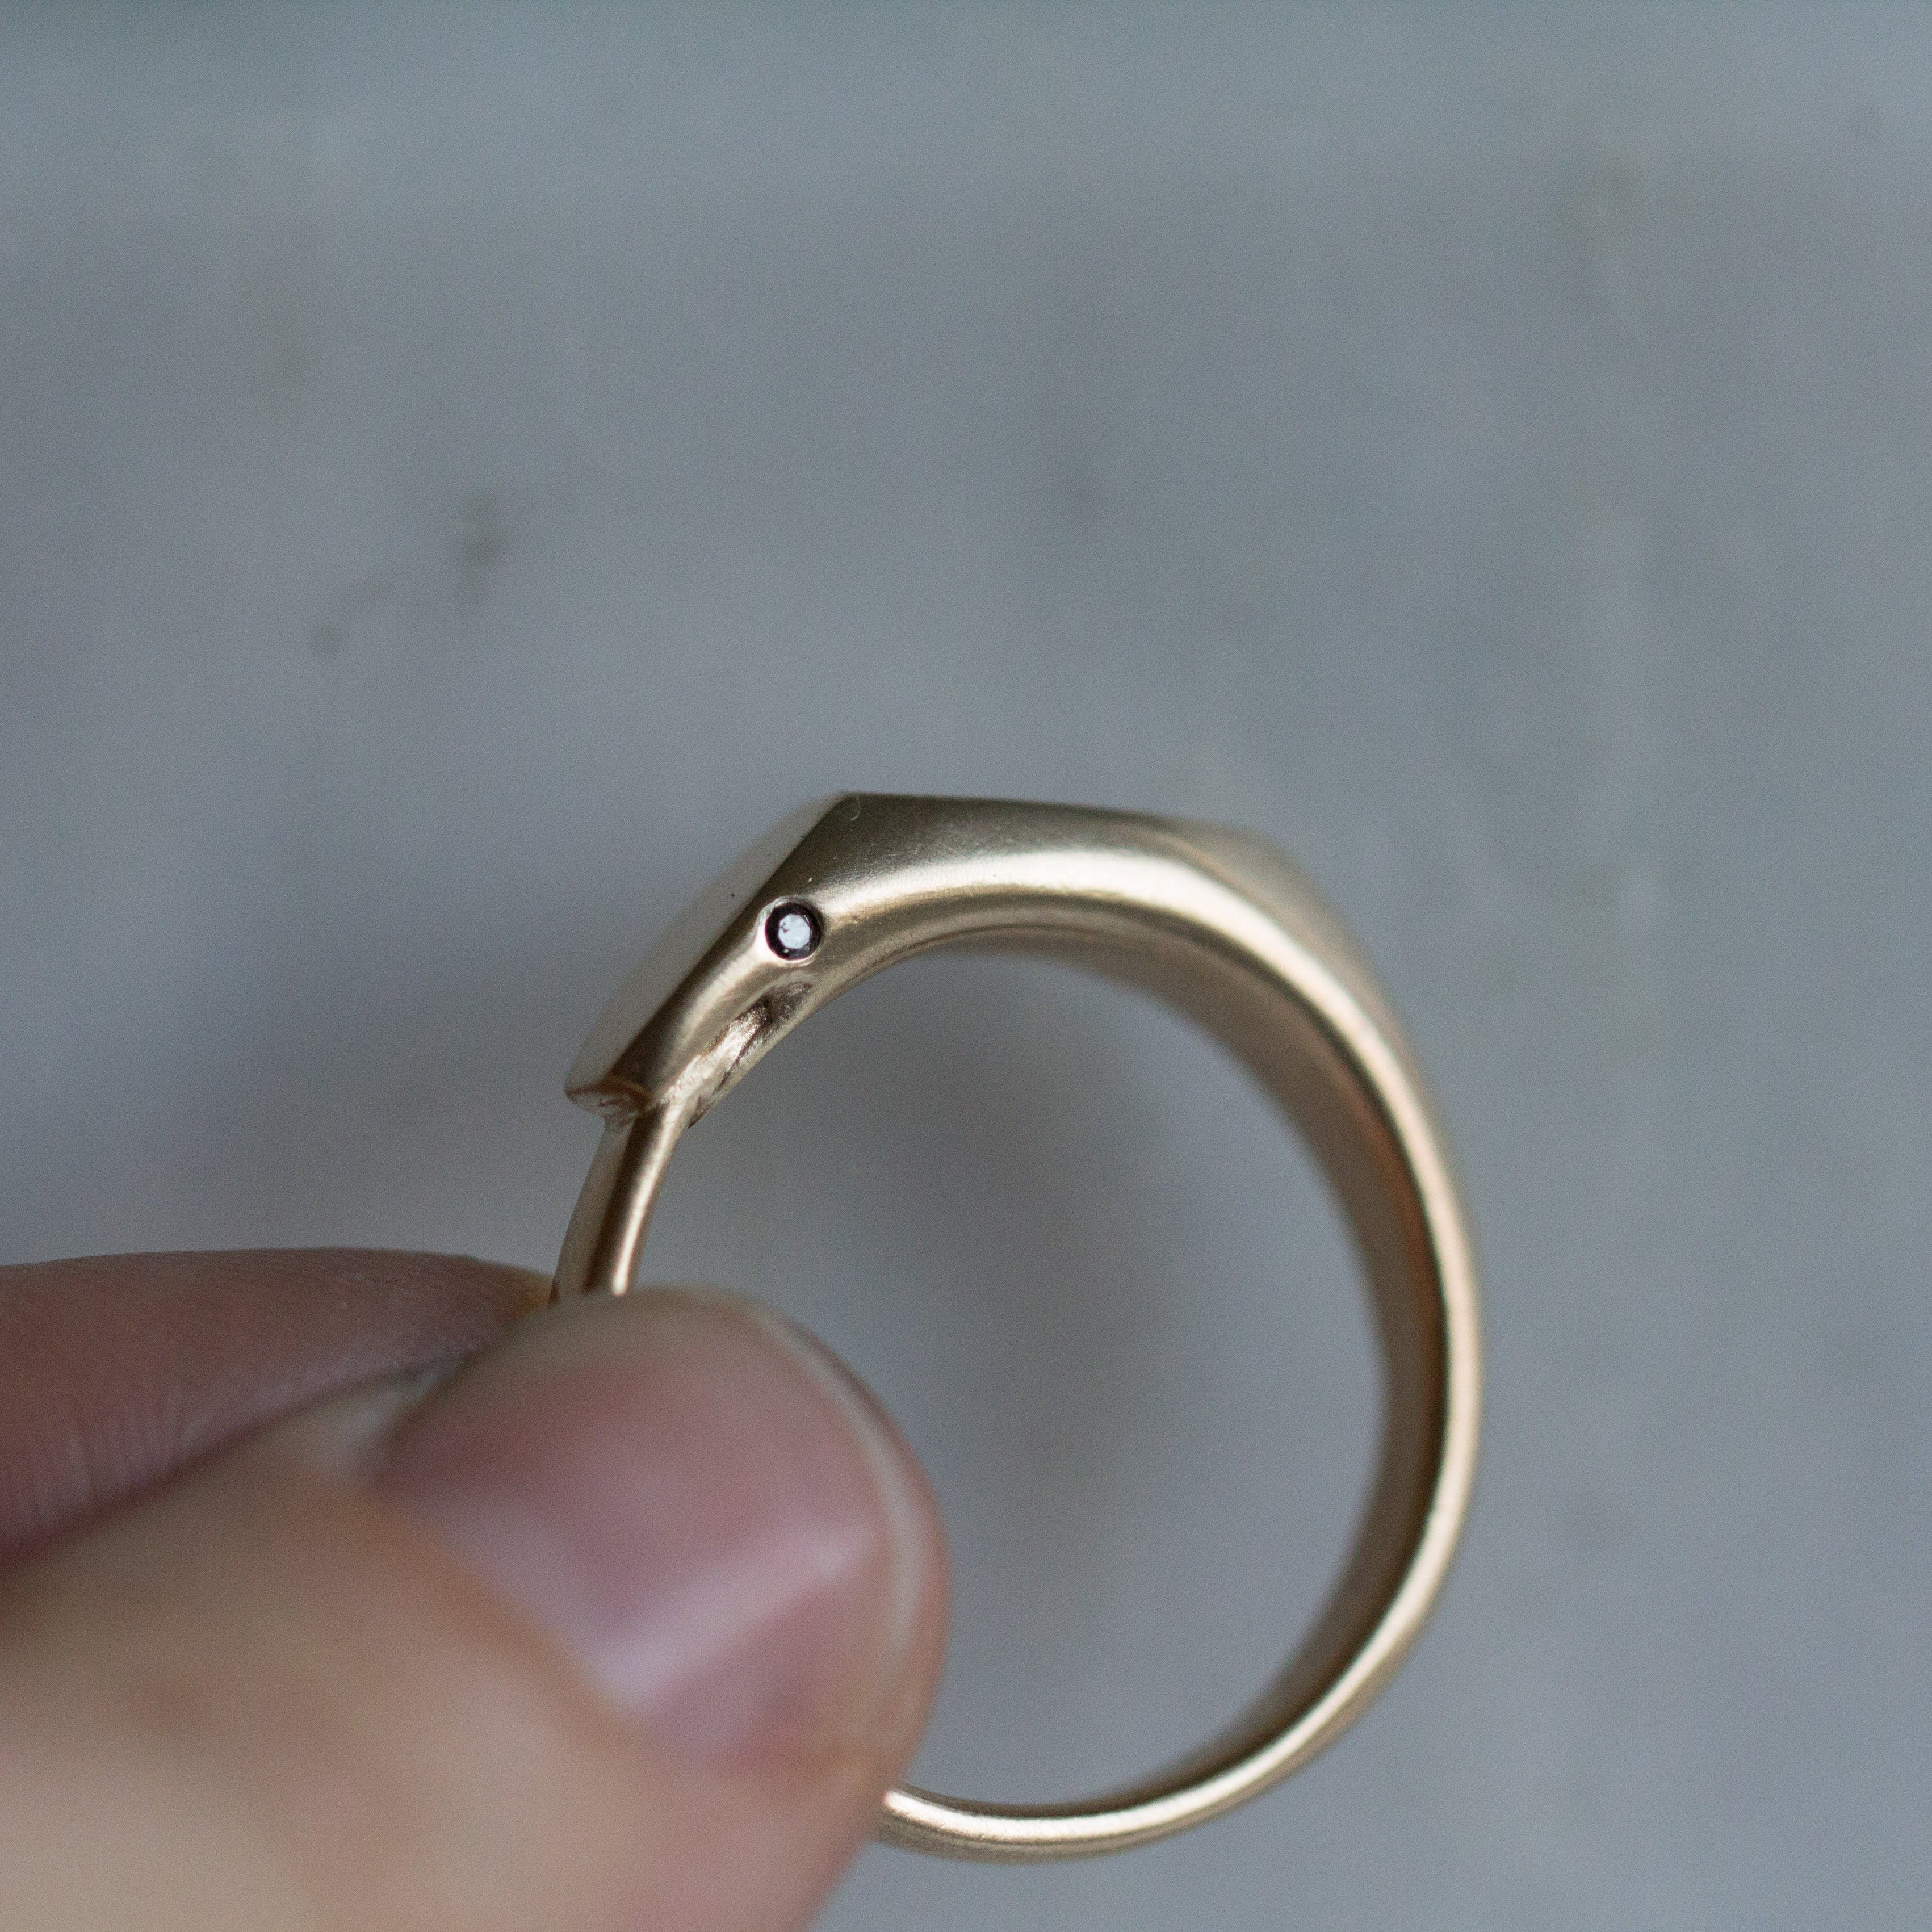 12th HOUSE JEWELRY RING Ouroboros Rings in solid gold